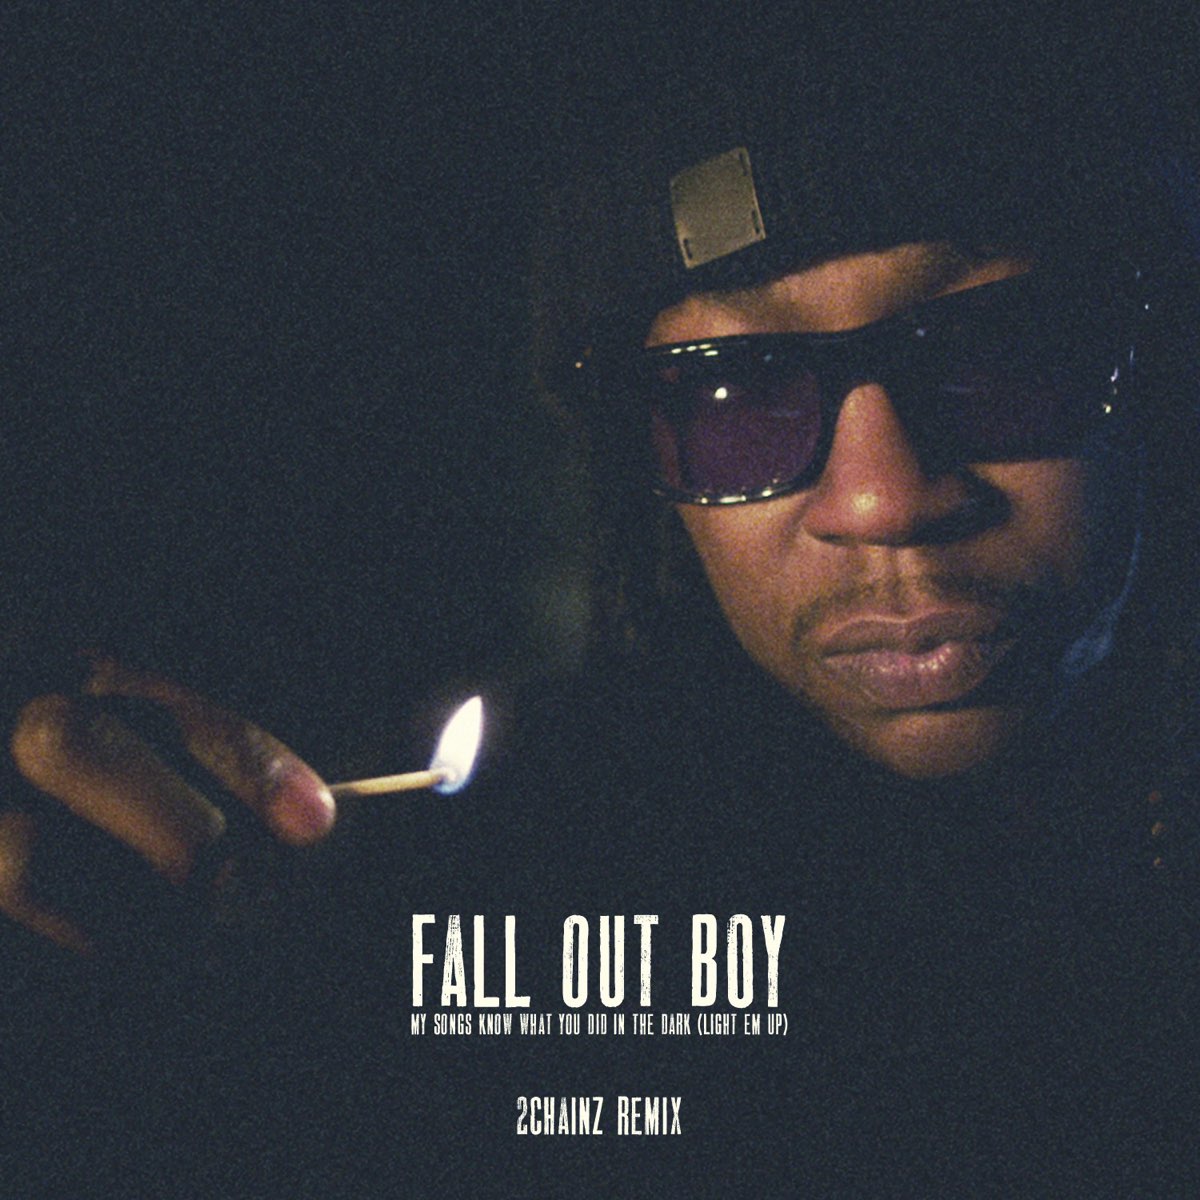 Fall out boy light em up. My Songs know what you did in the Dark (Light em up) Fall out boy. Fall out boy Light em up обложка. Fall out boy my Songs know in the Dark.